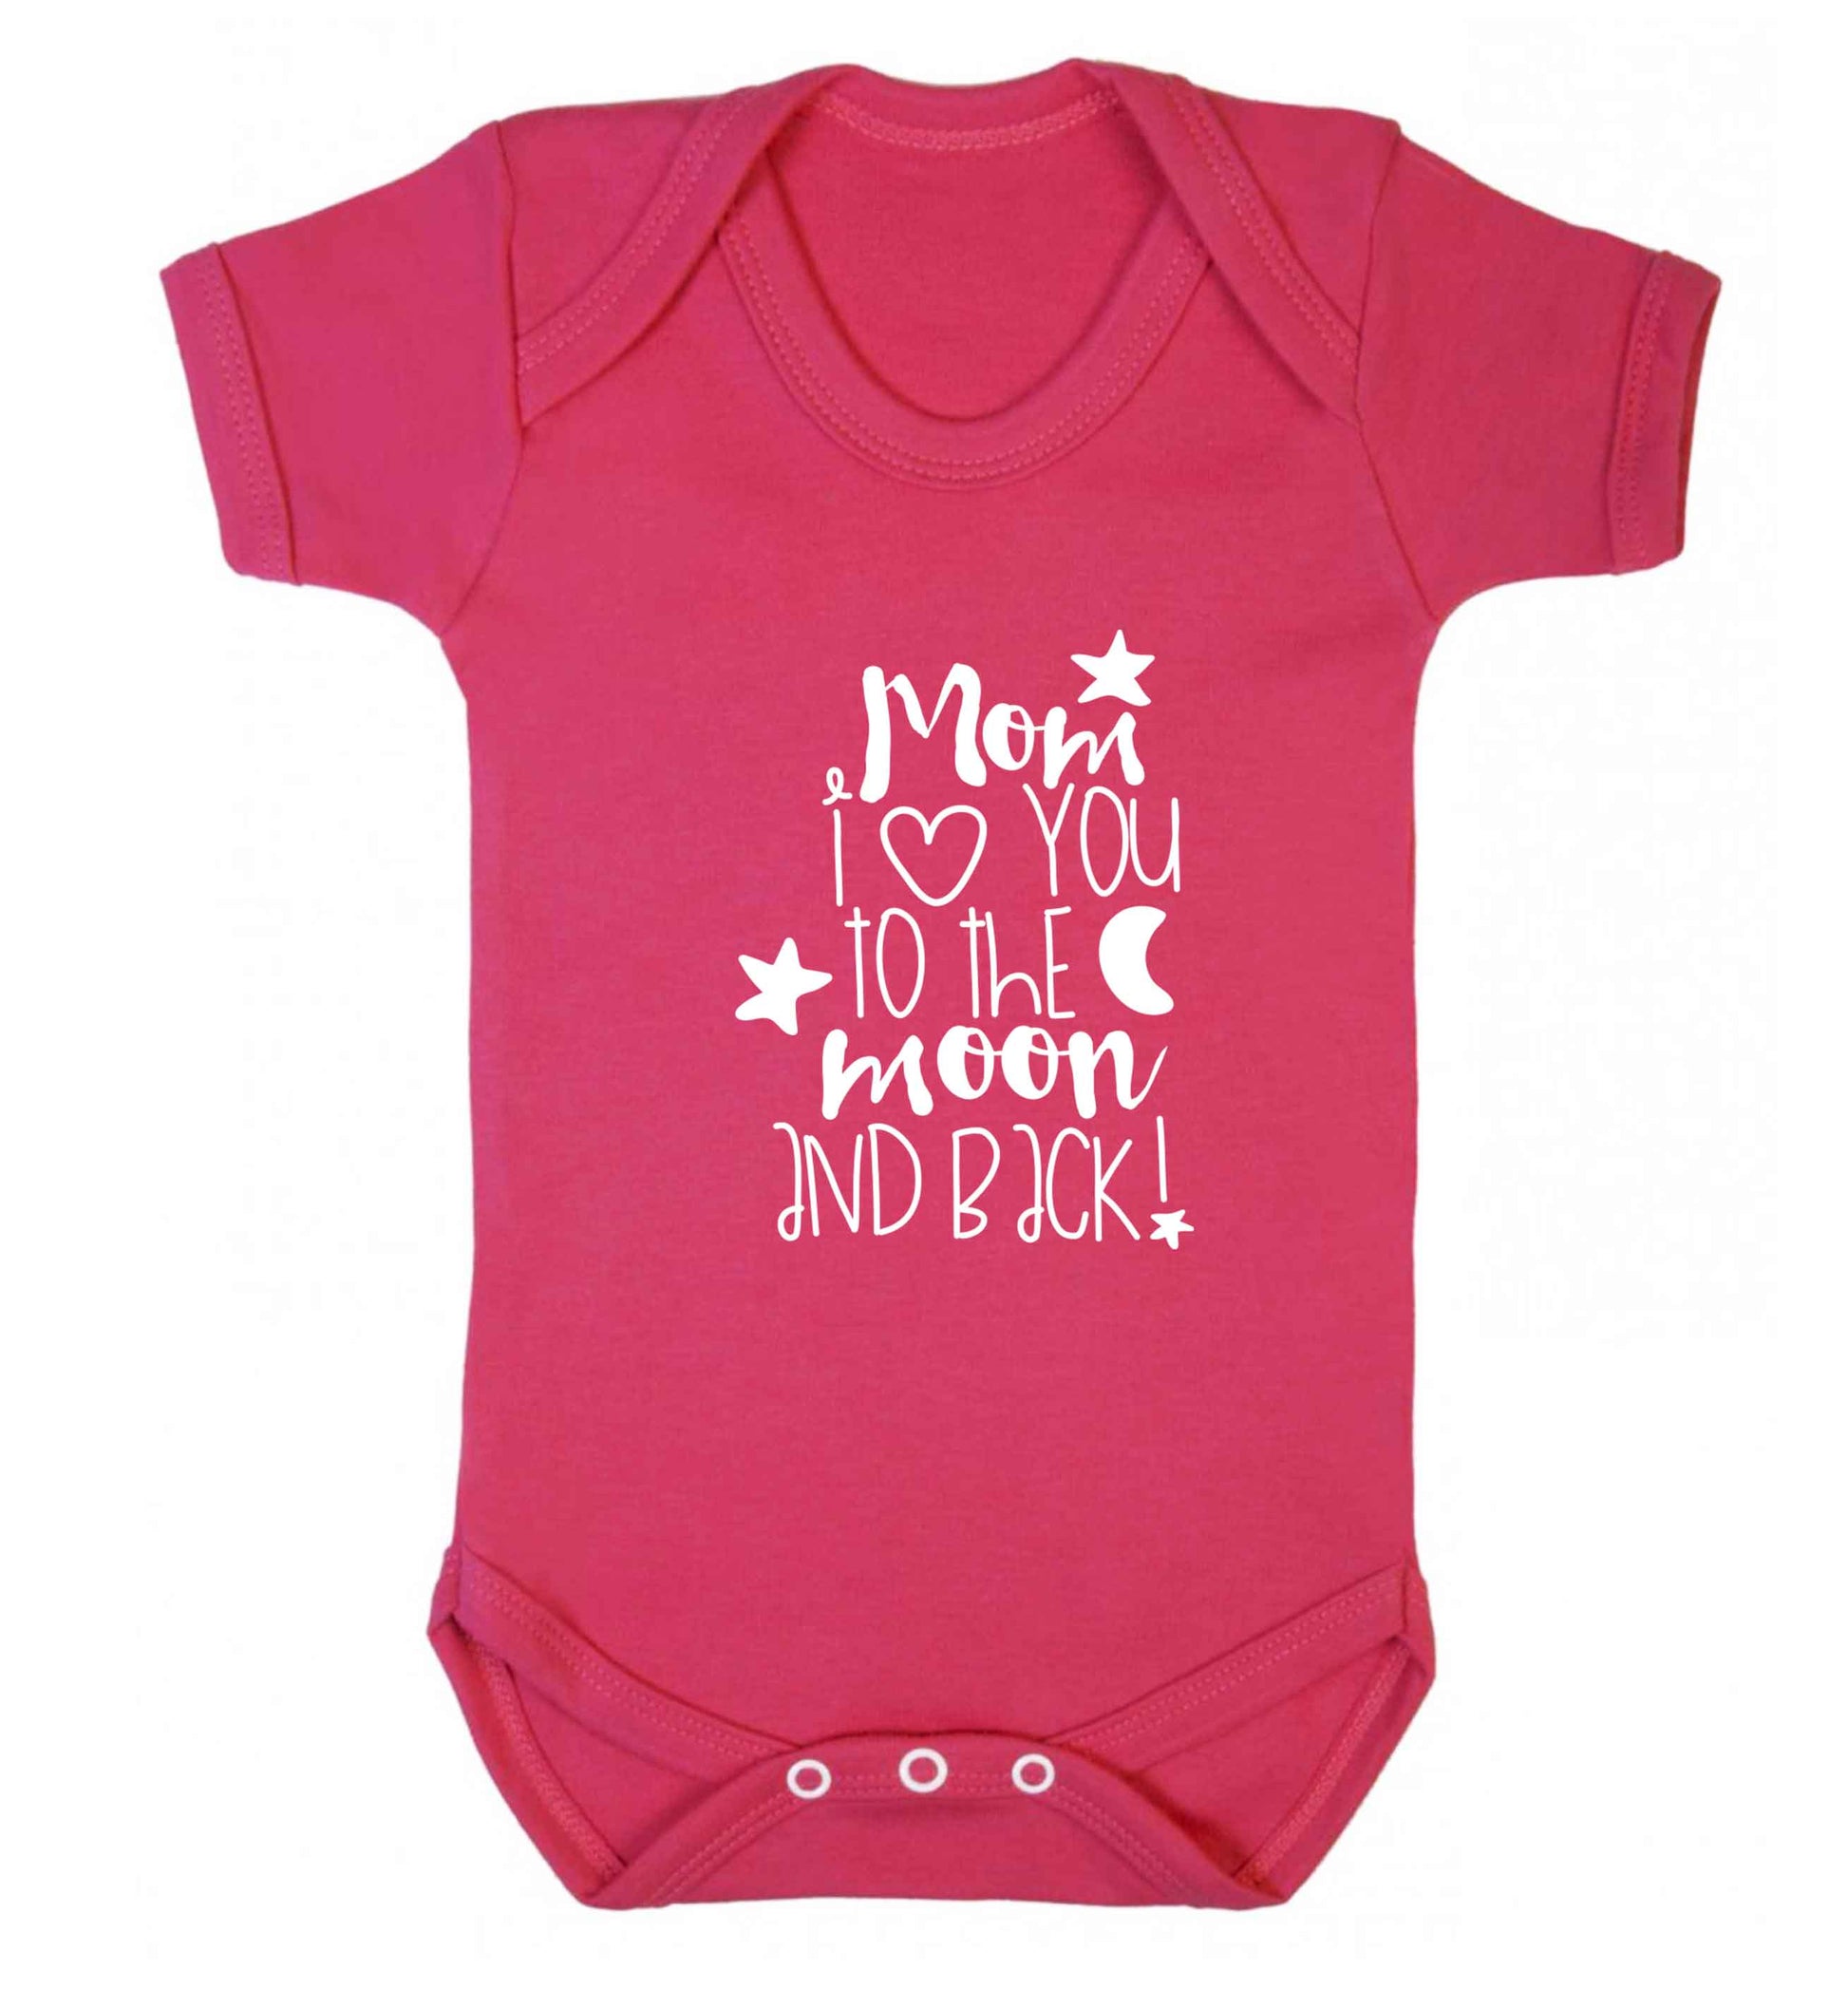 Mom I love you to the moon and back baby vest dark pink 18-24 months